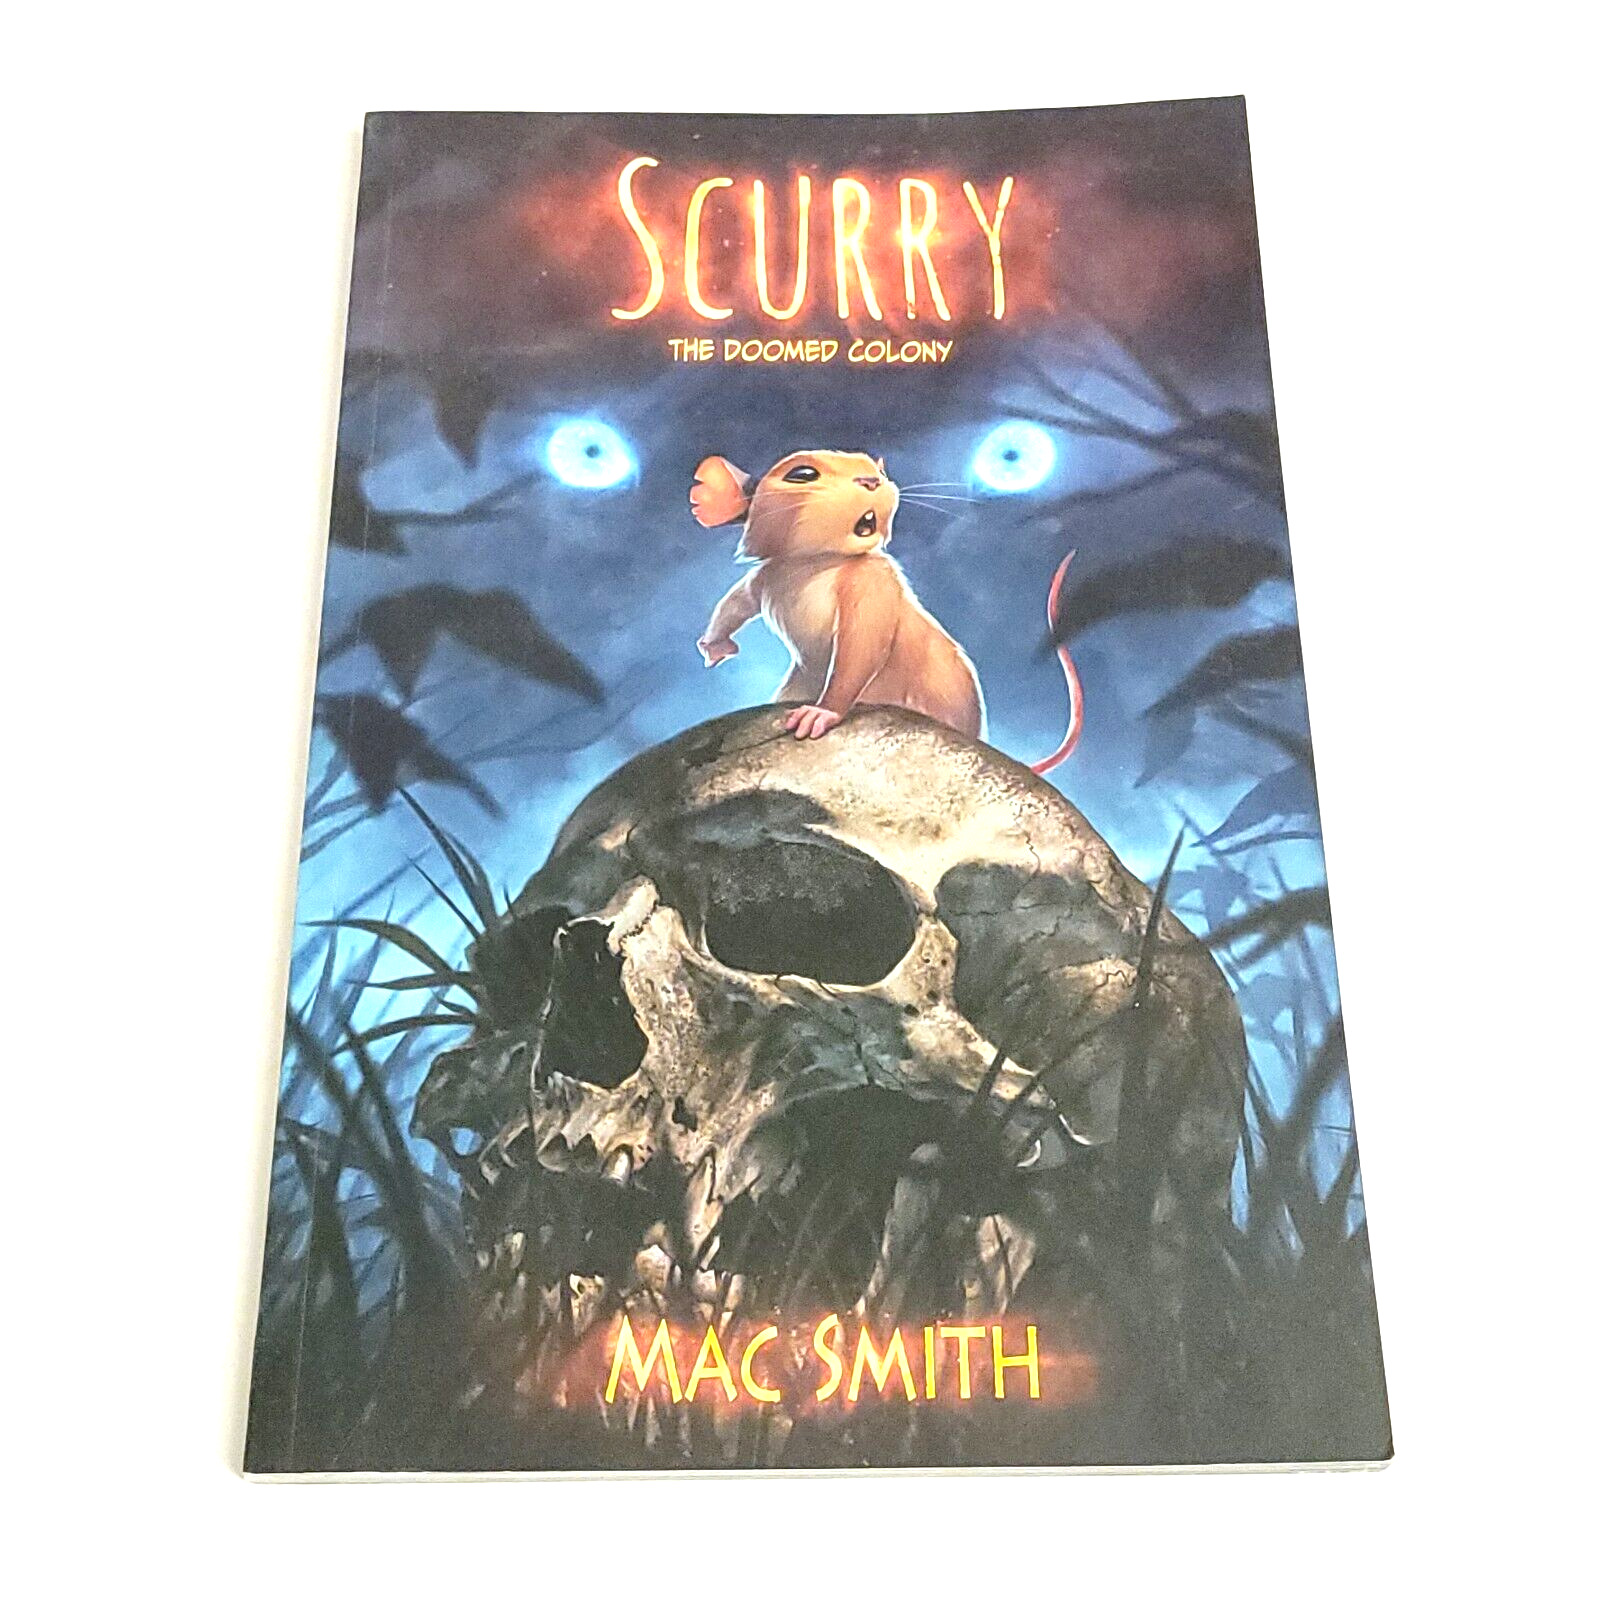 SCURRY THE DOOMED COLONY First Edition  2016 Mac Smith Softcover 